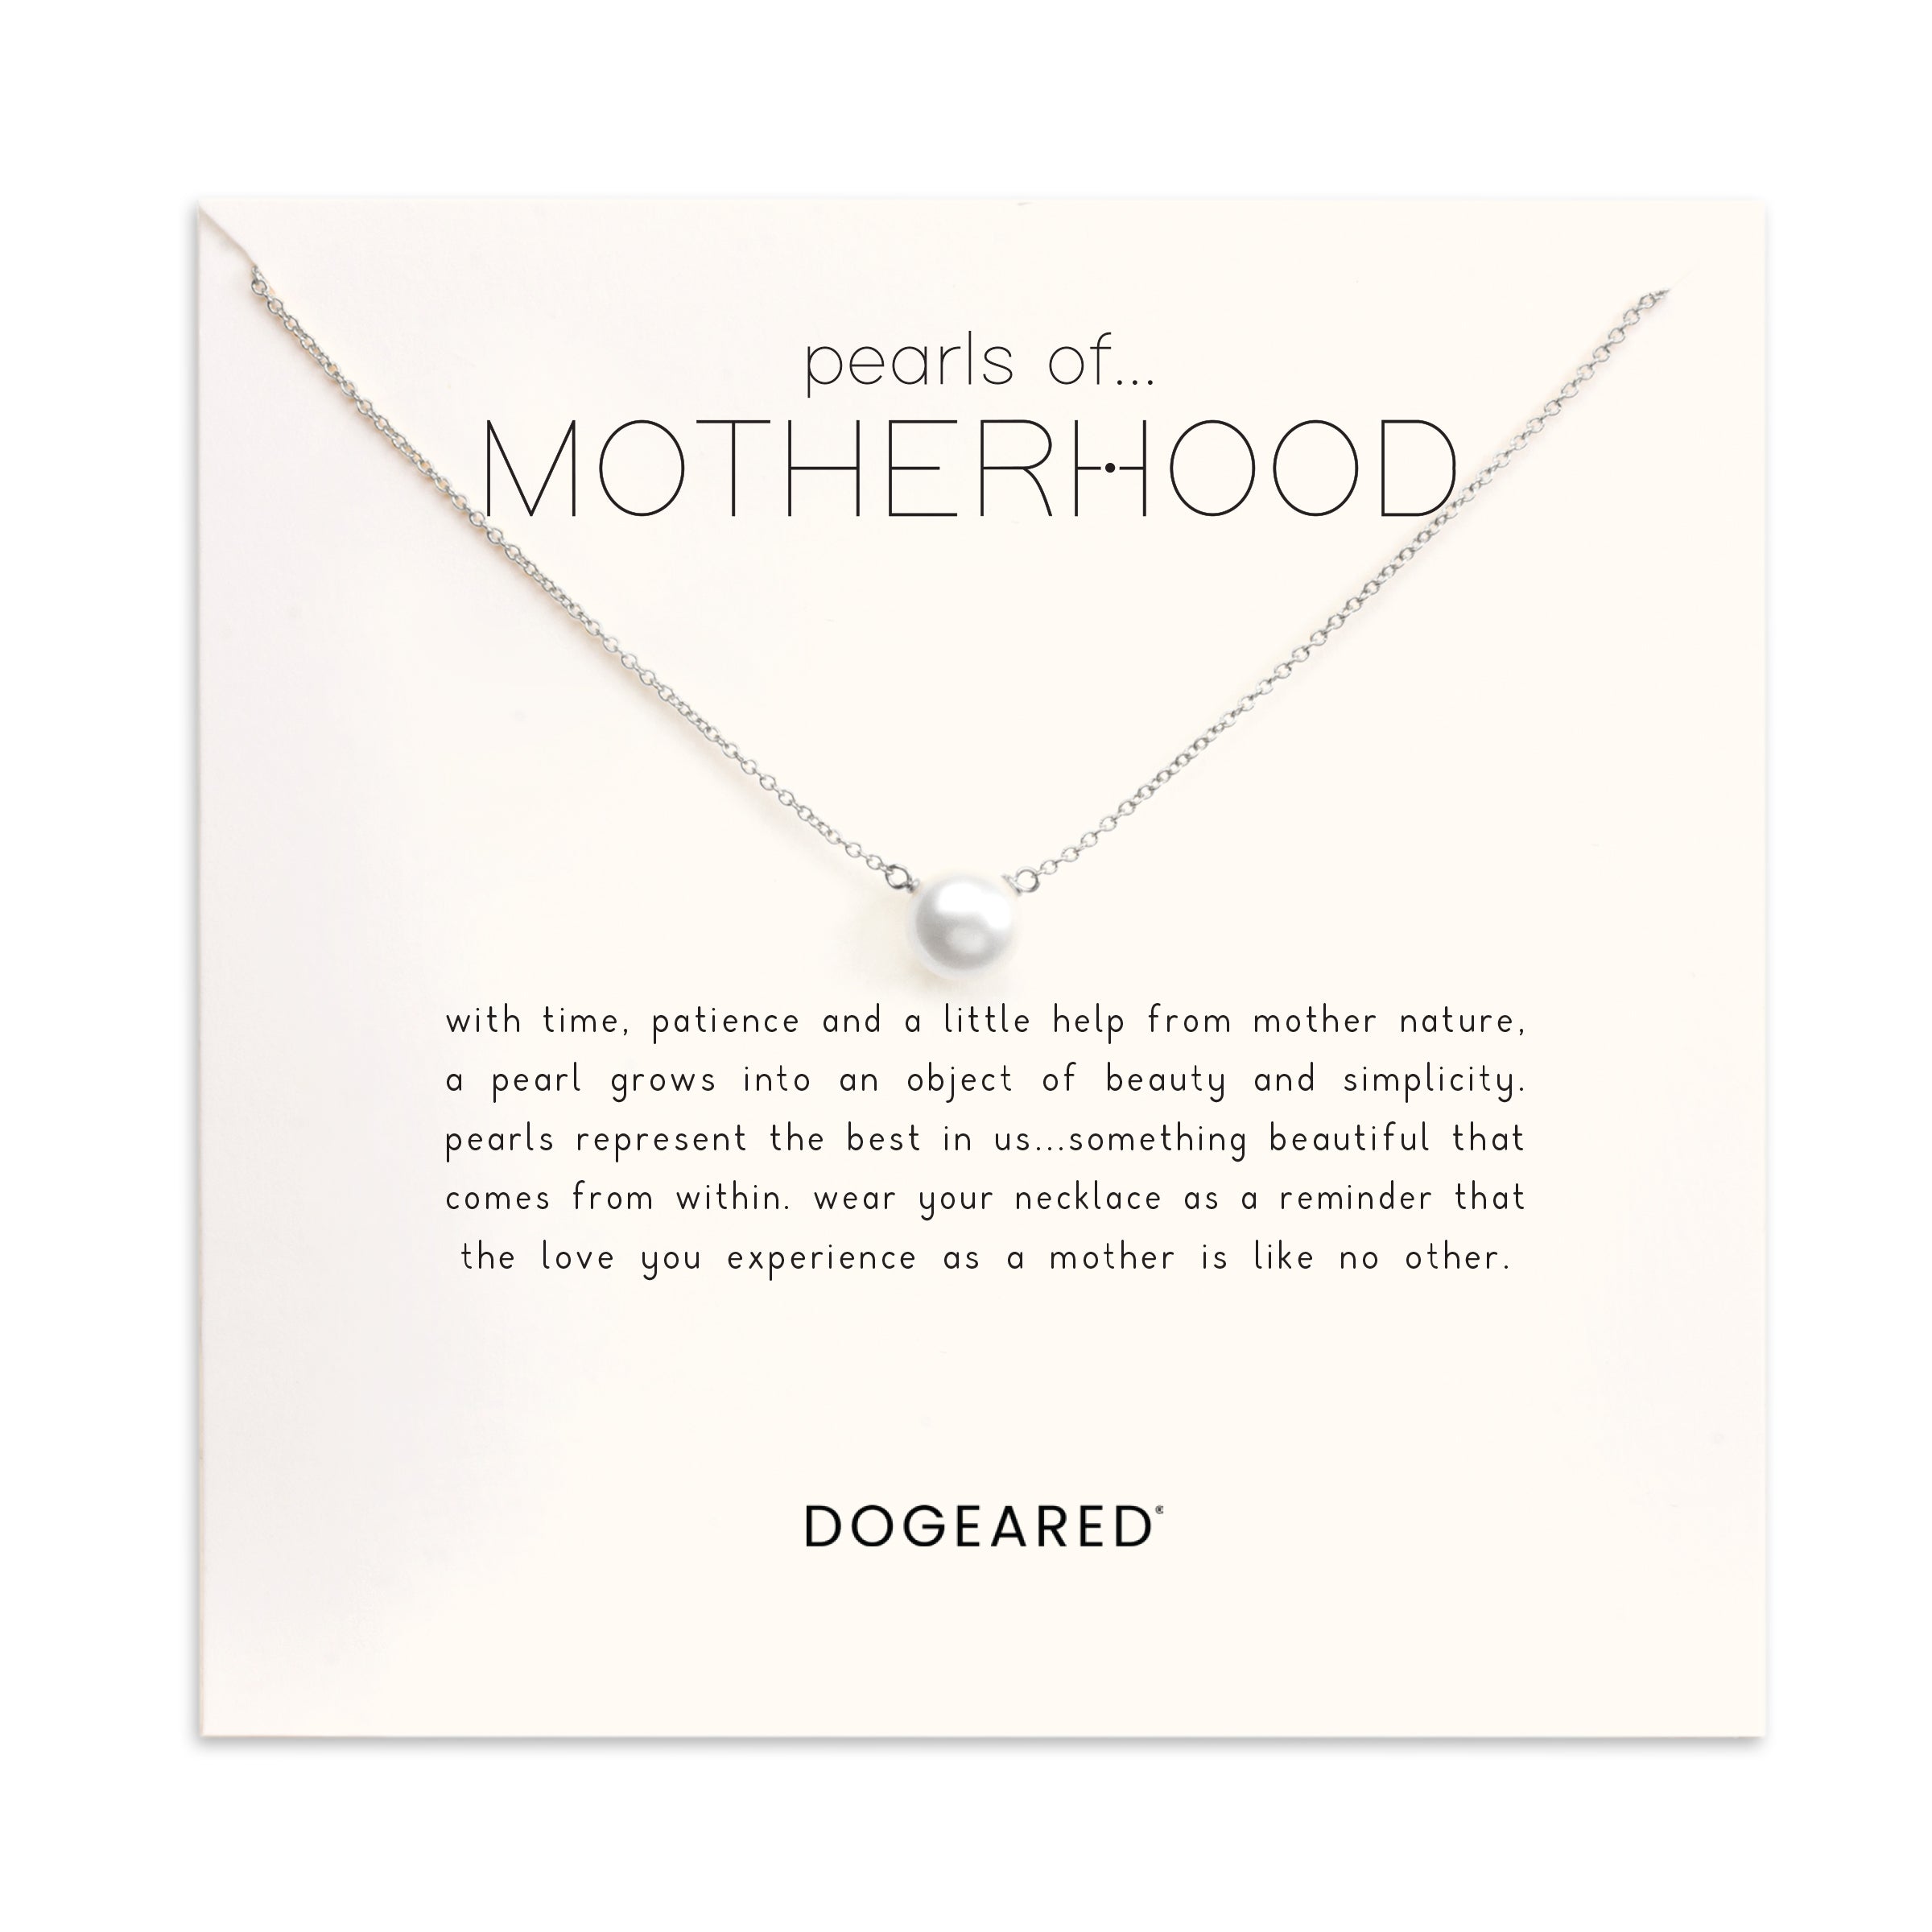 Pearls of motherhood large white pearl necklace - Dogeared